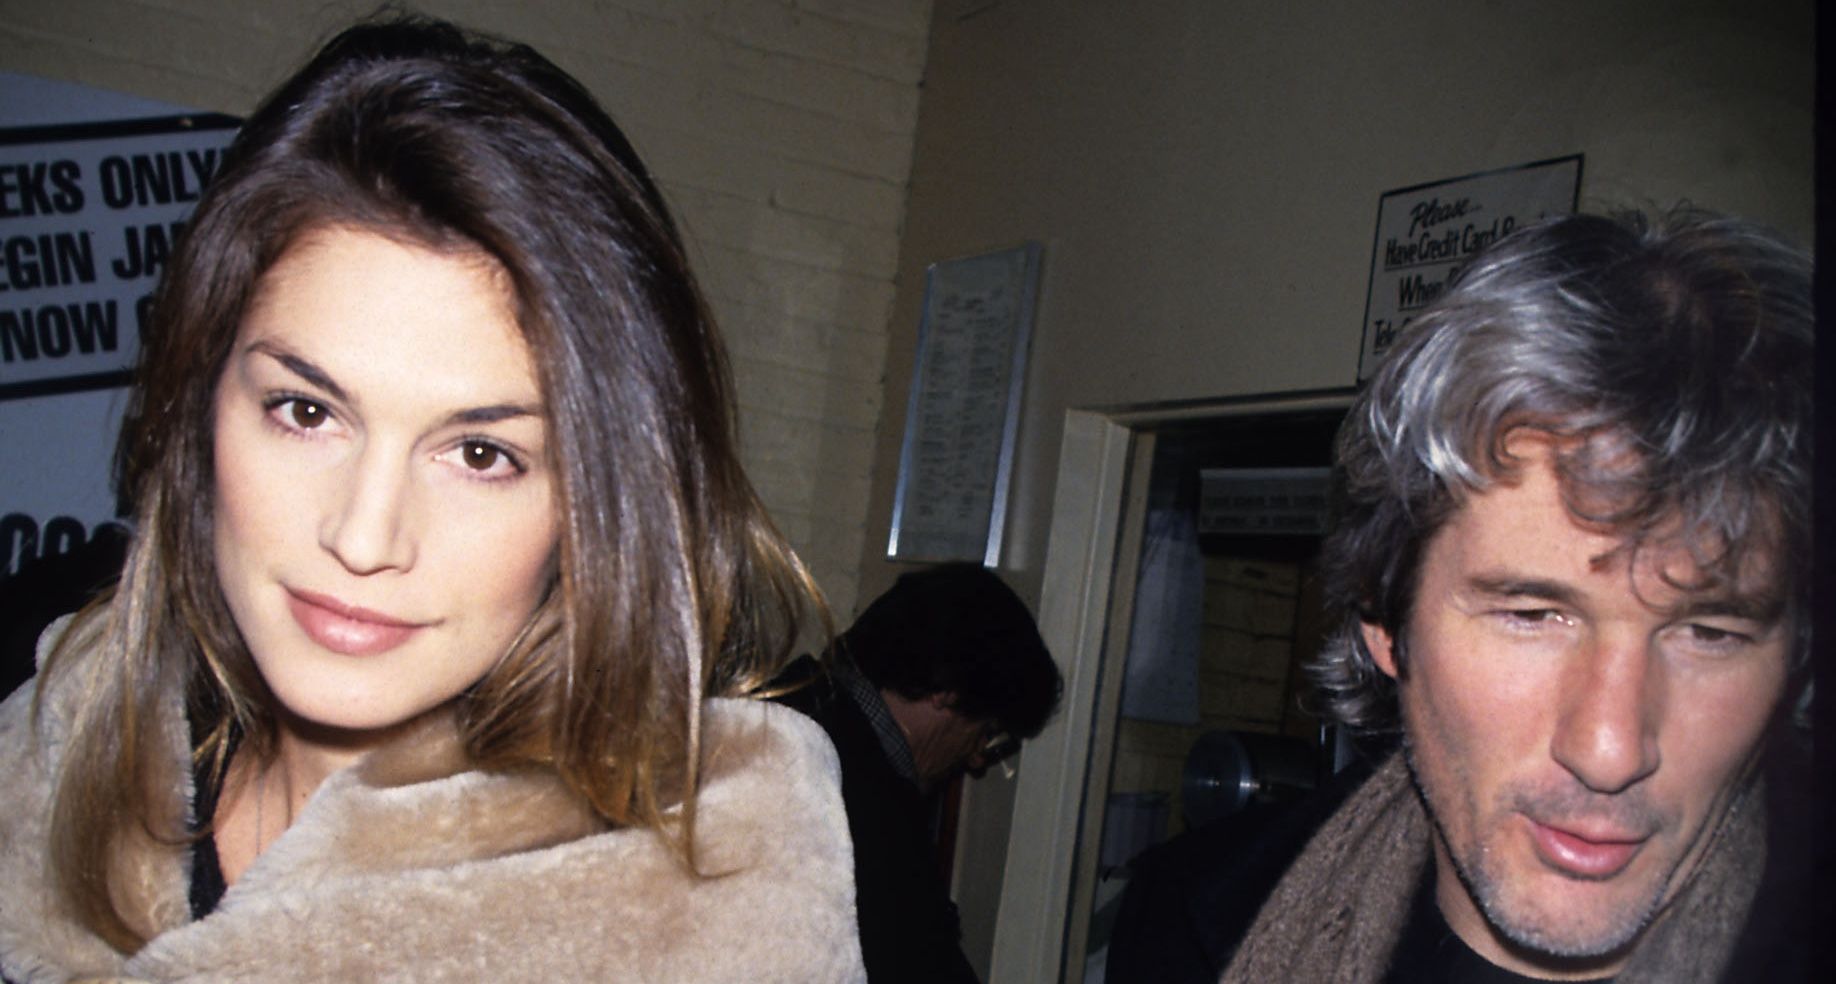 Richard Gere Is Now "Like A Stranger" To Cindy Crawford After Their 1995 Divorce